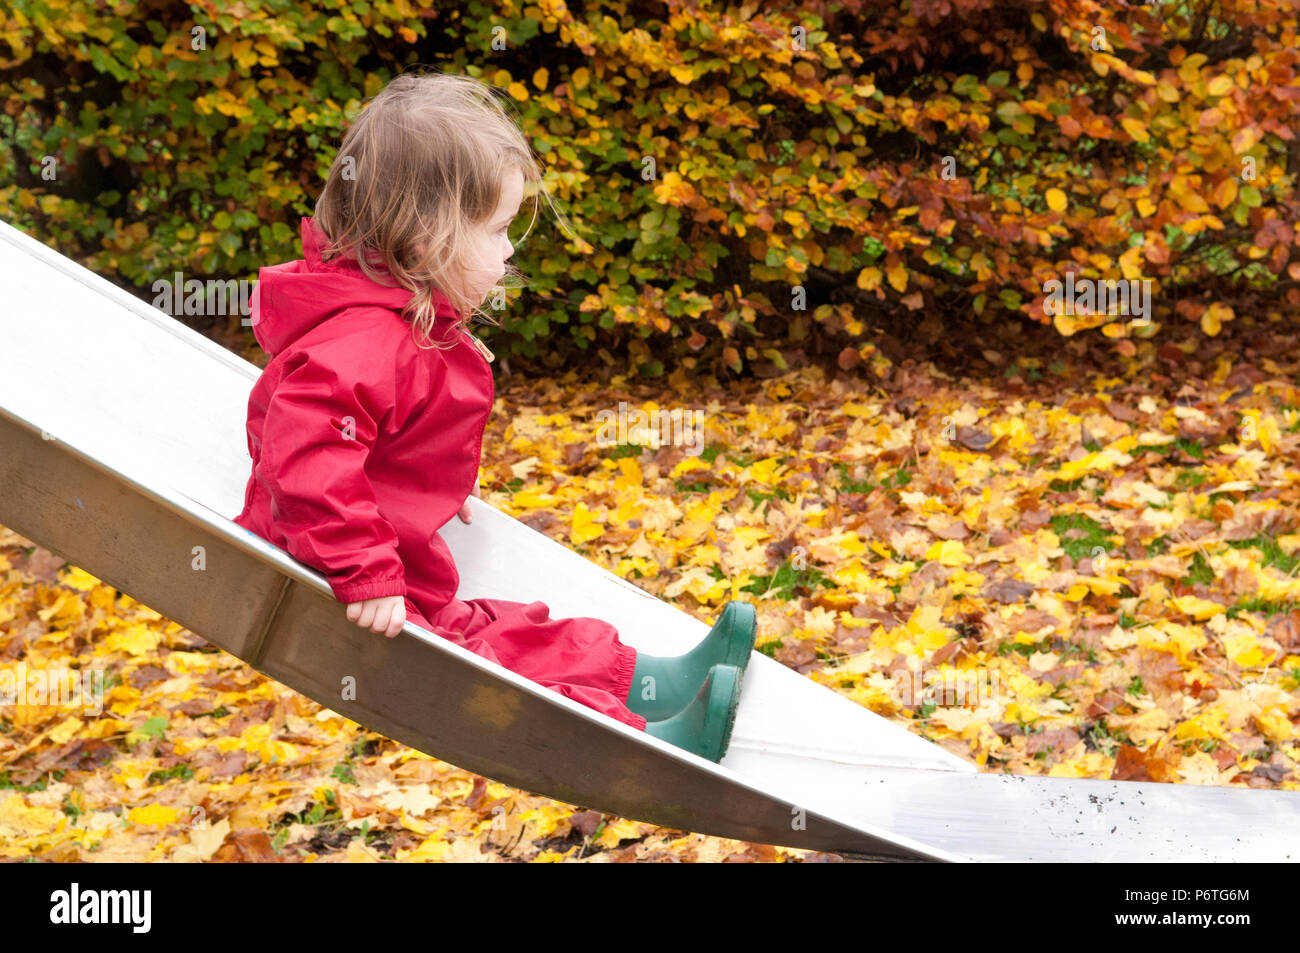 Little girl wearing a red puddle suit and green wellies sitting on a slide Stock Photo